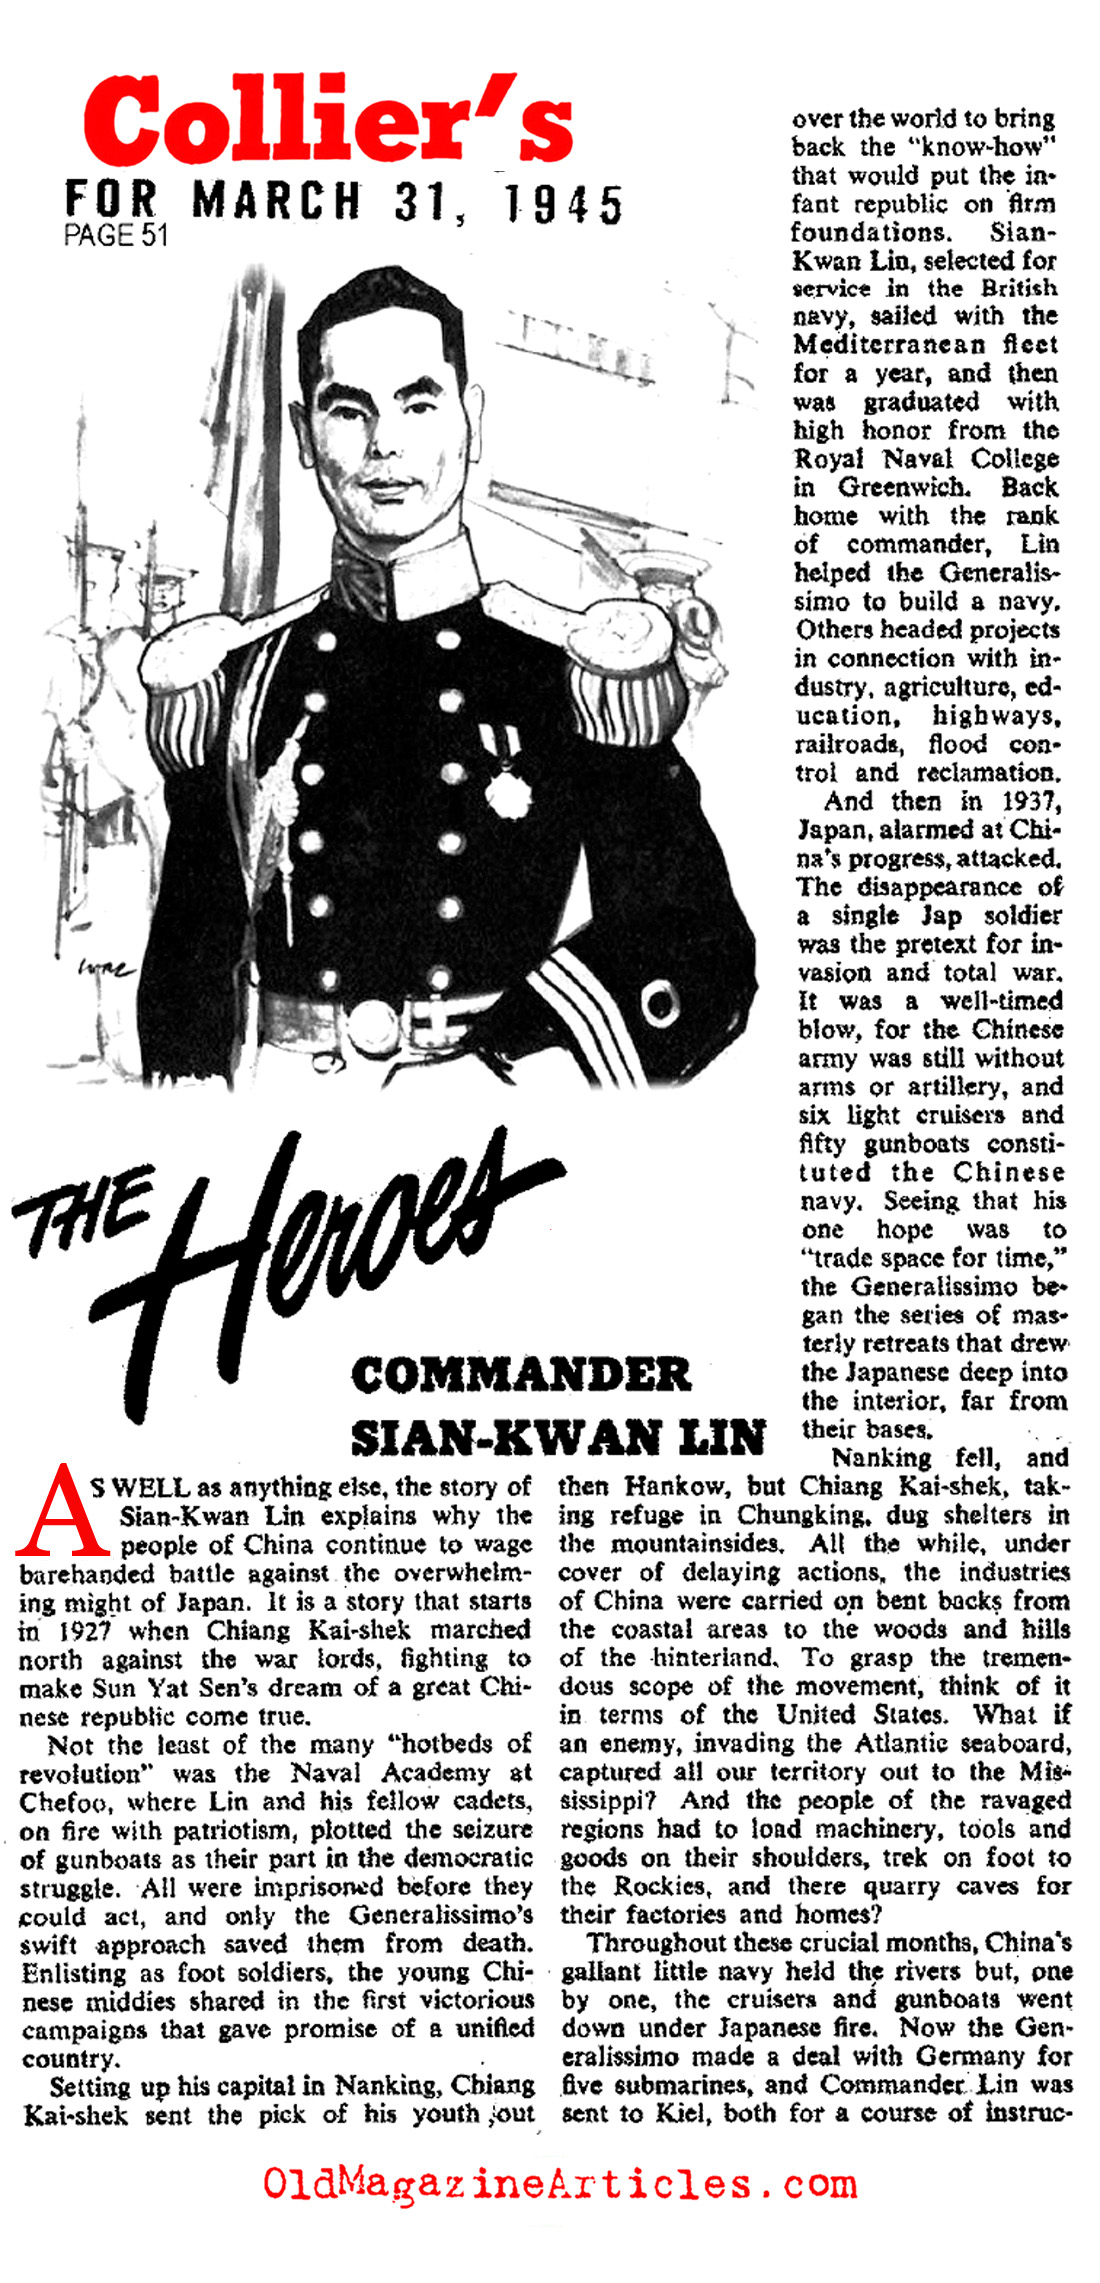 The Wartime Leadership of Sian-Kuan Lin (Collier's Magazine, 1945)